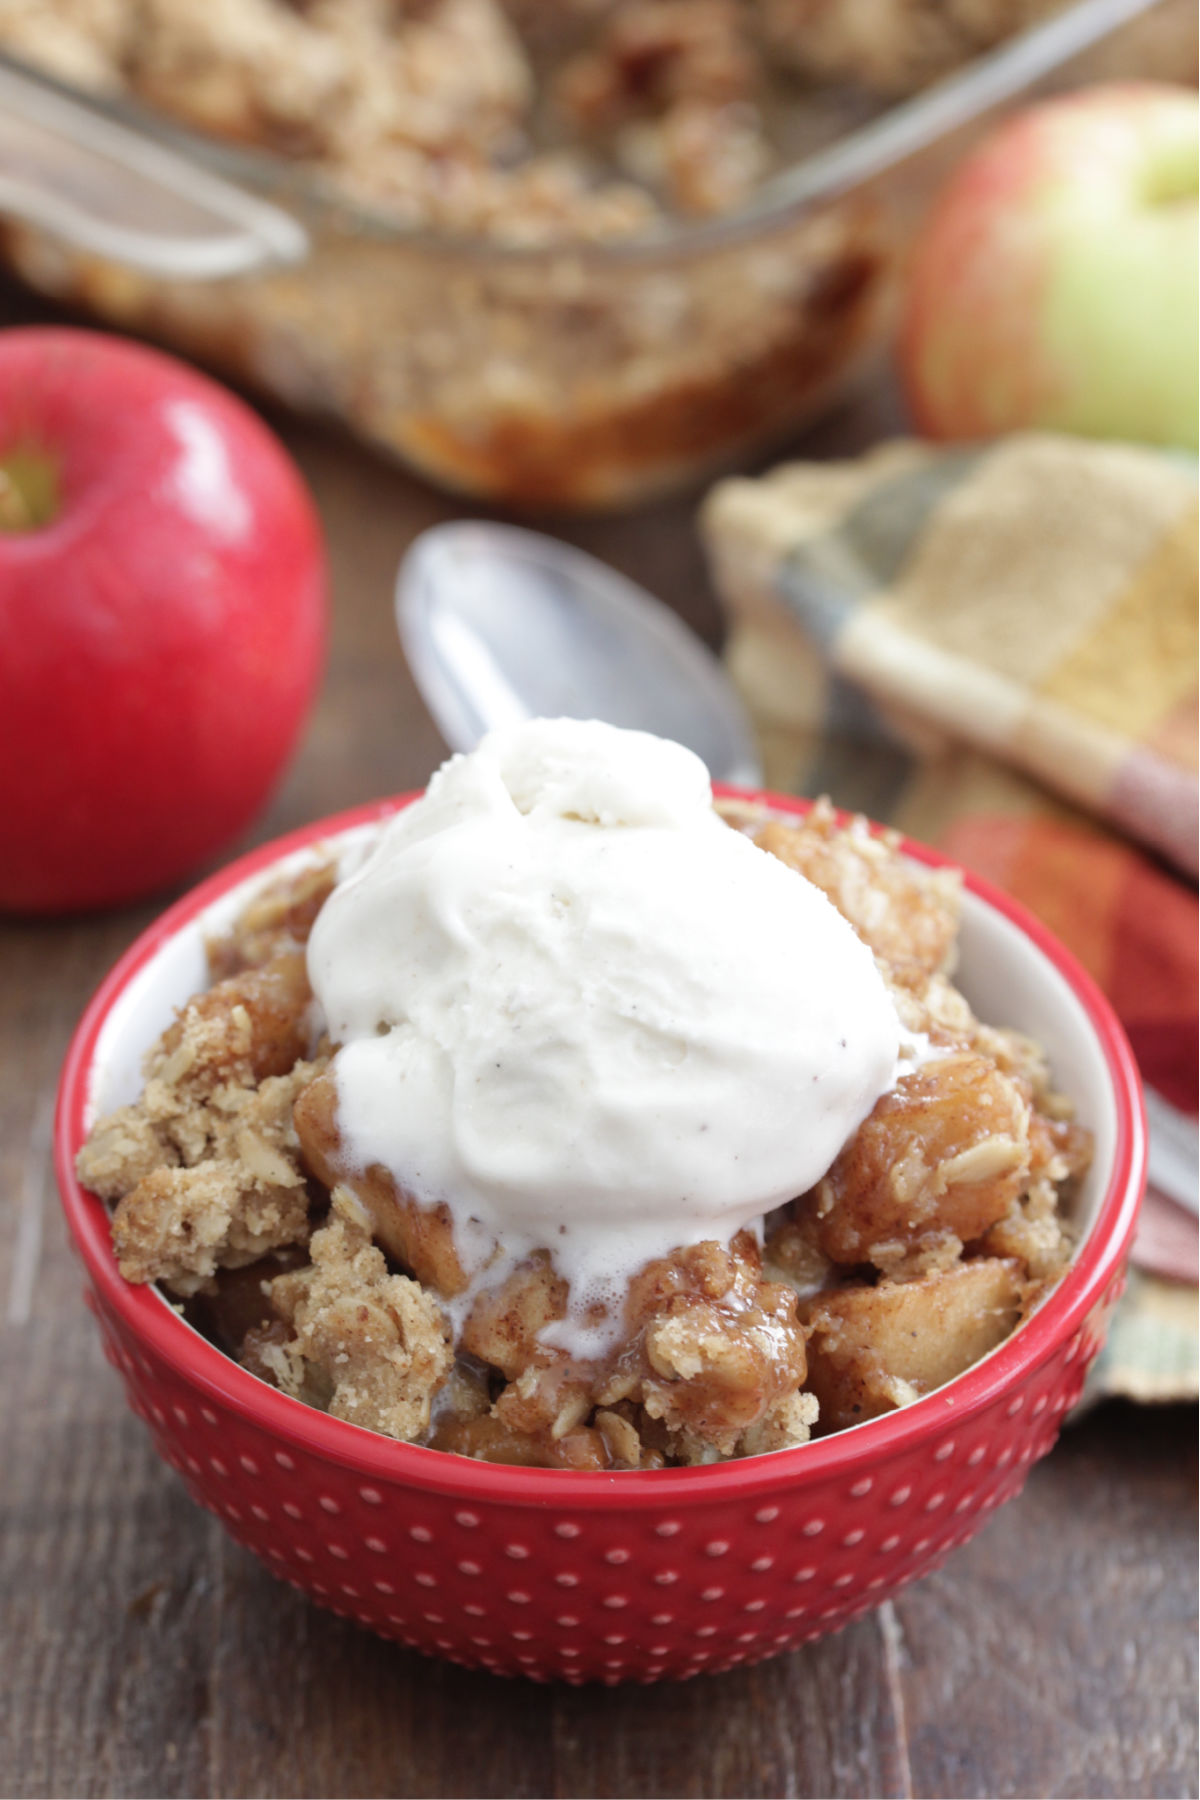 Caramel Apple Crisp in a red bowl with vanilla ice cream on top